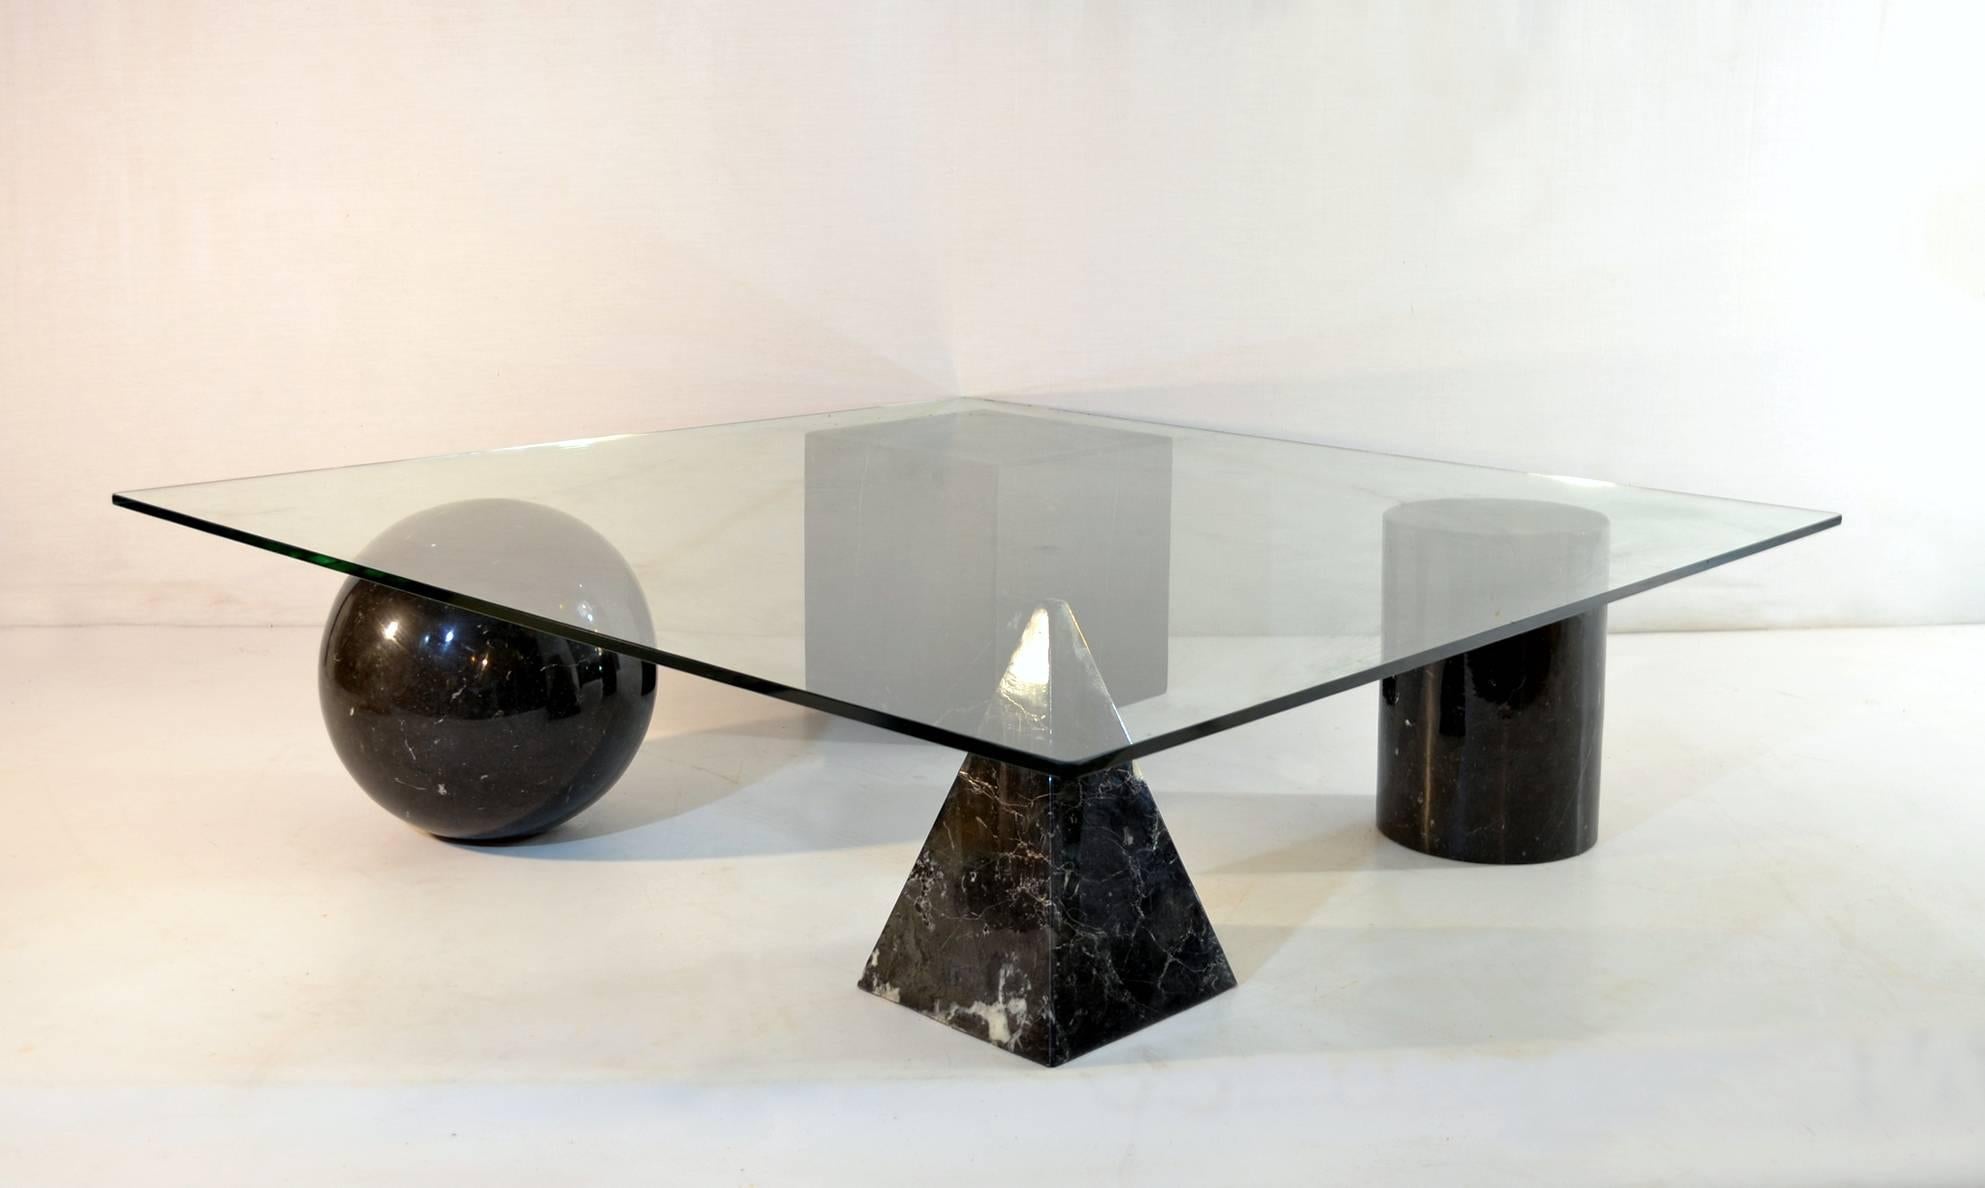 Metafora cocktail table designed by Lella and Massimo Vignelli for Martinelli Luce. The four geometric shapes, a cube, a cylinder, a ball and a pyramid are made in black marble with white veins.